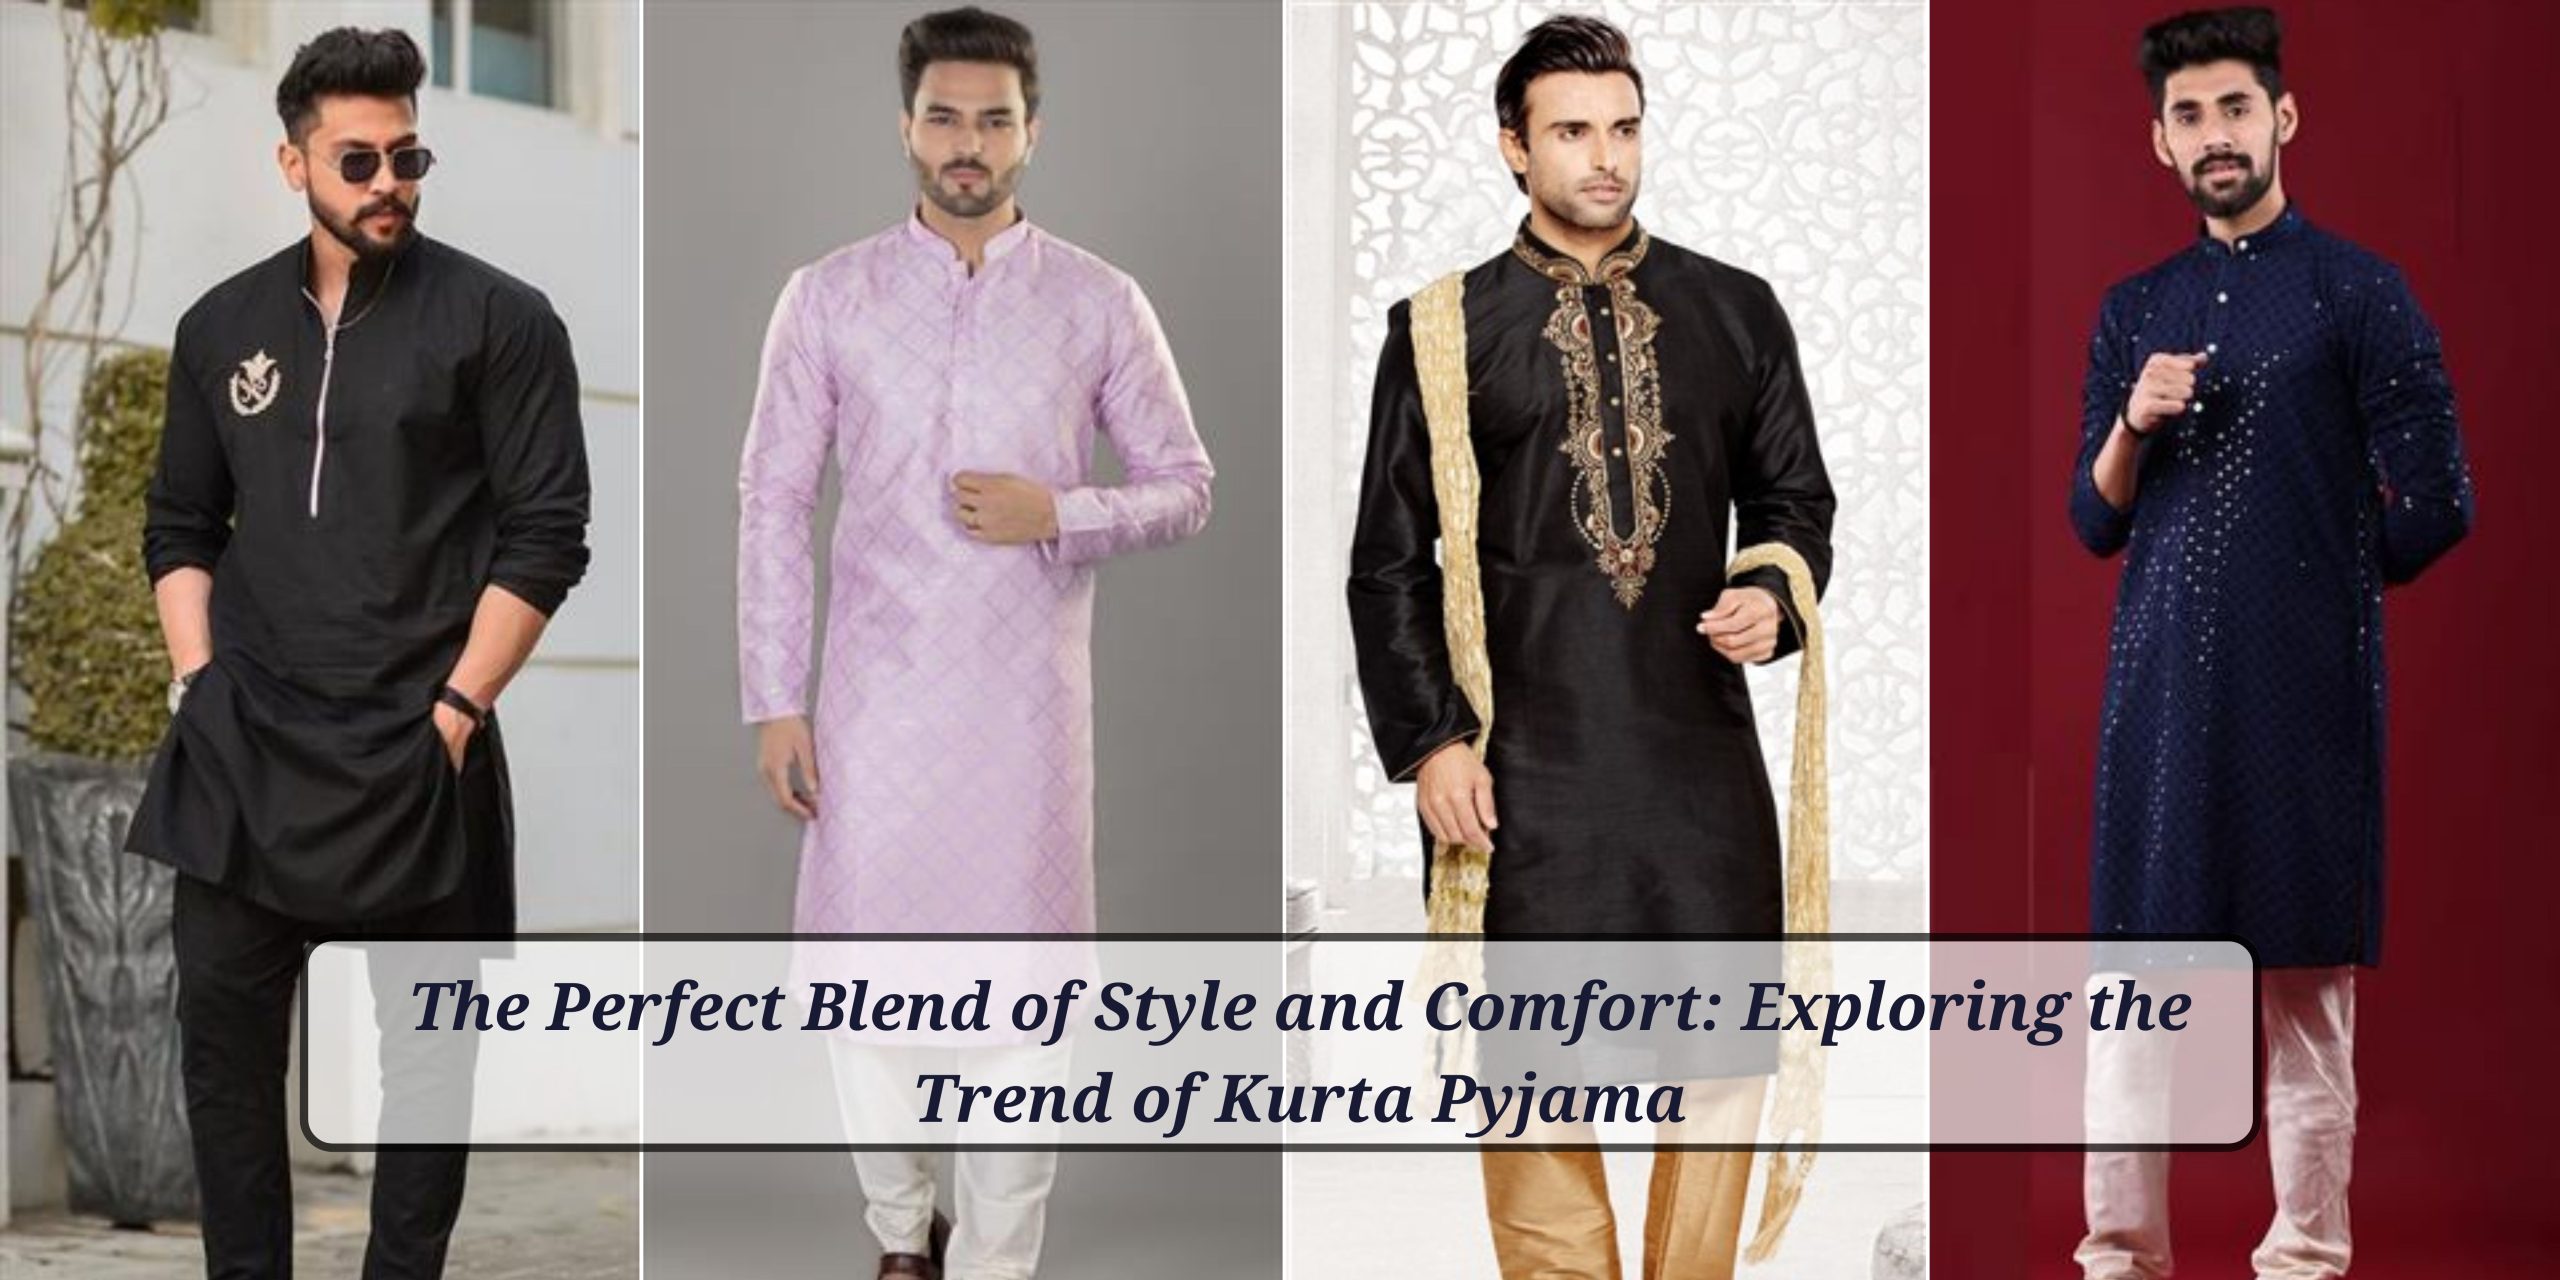 The Perfect Blend of Style and Comfort: Exploring the Trend of Kurta Pyjama